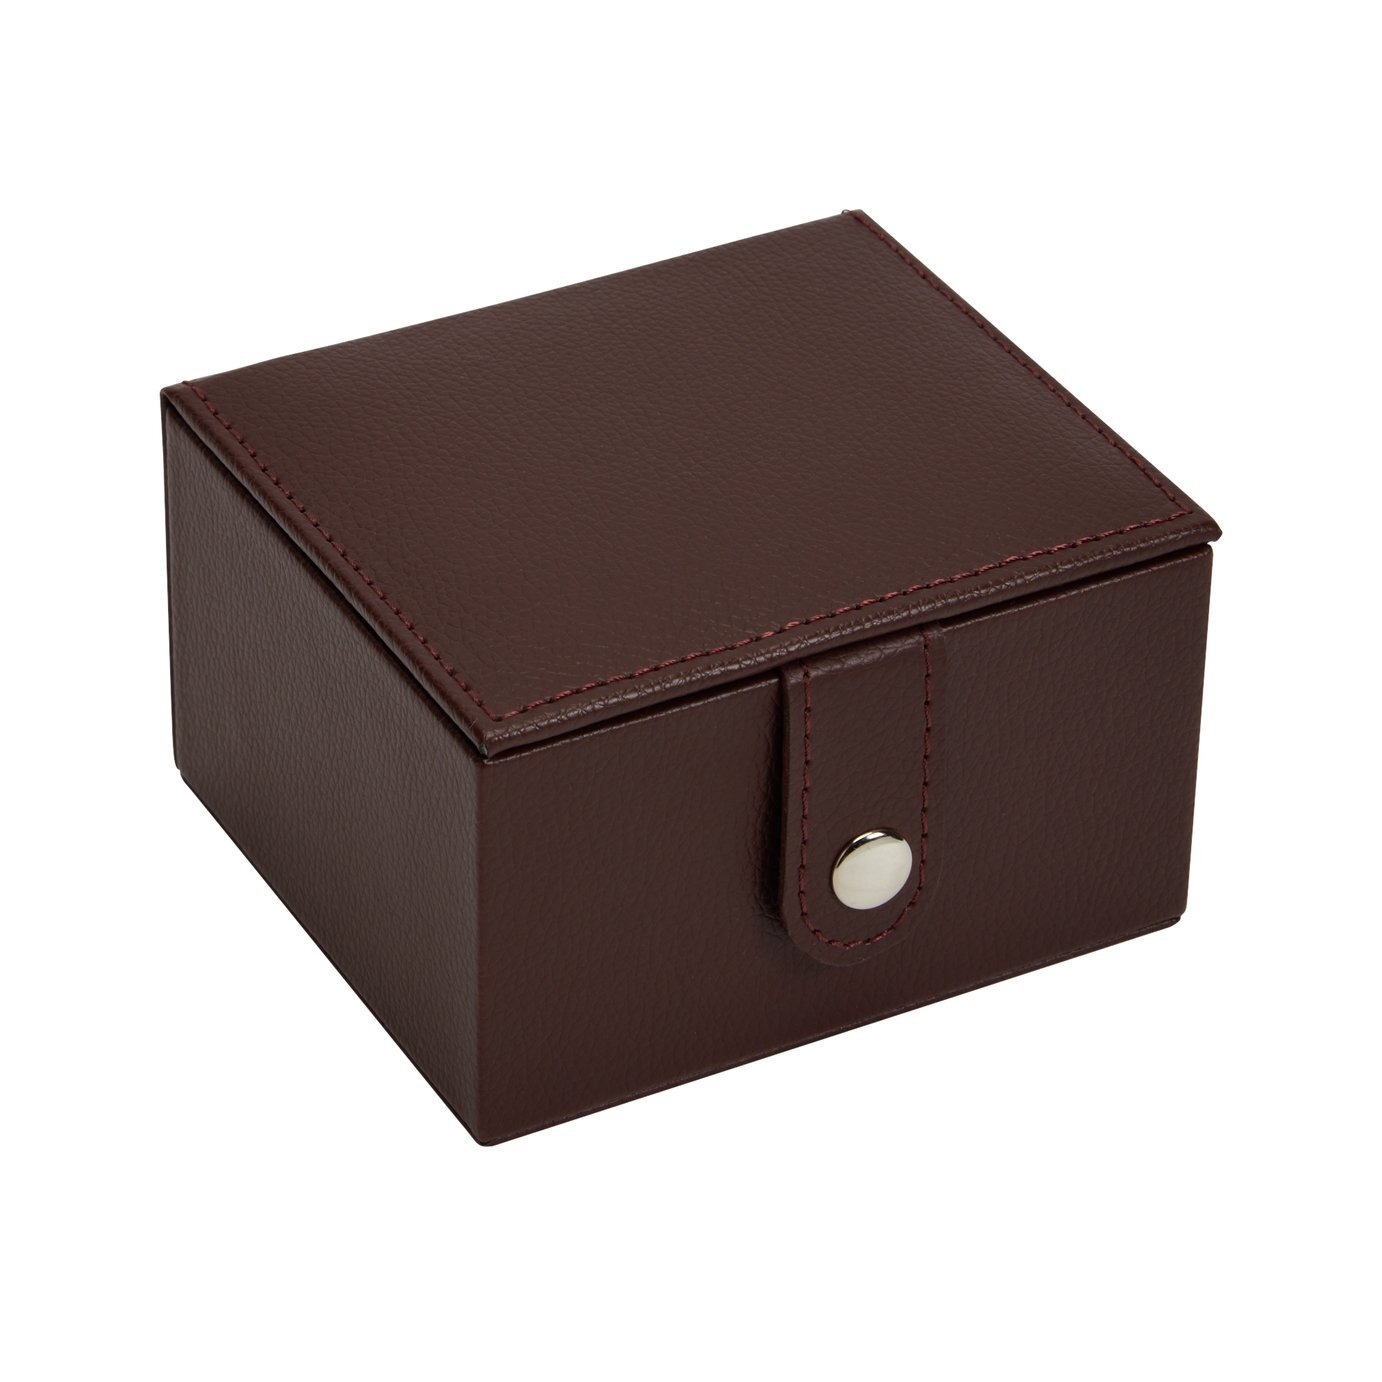 Argos Home Brown Faux Leather Mens Jewellery Box - image 1